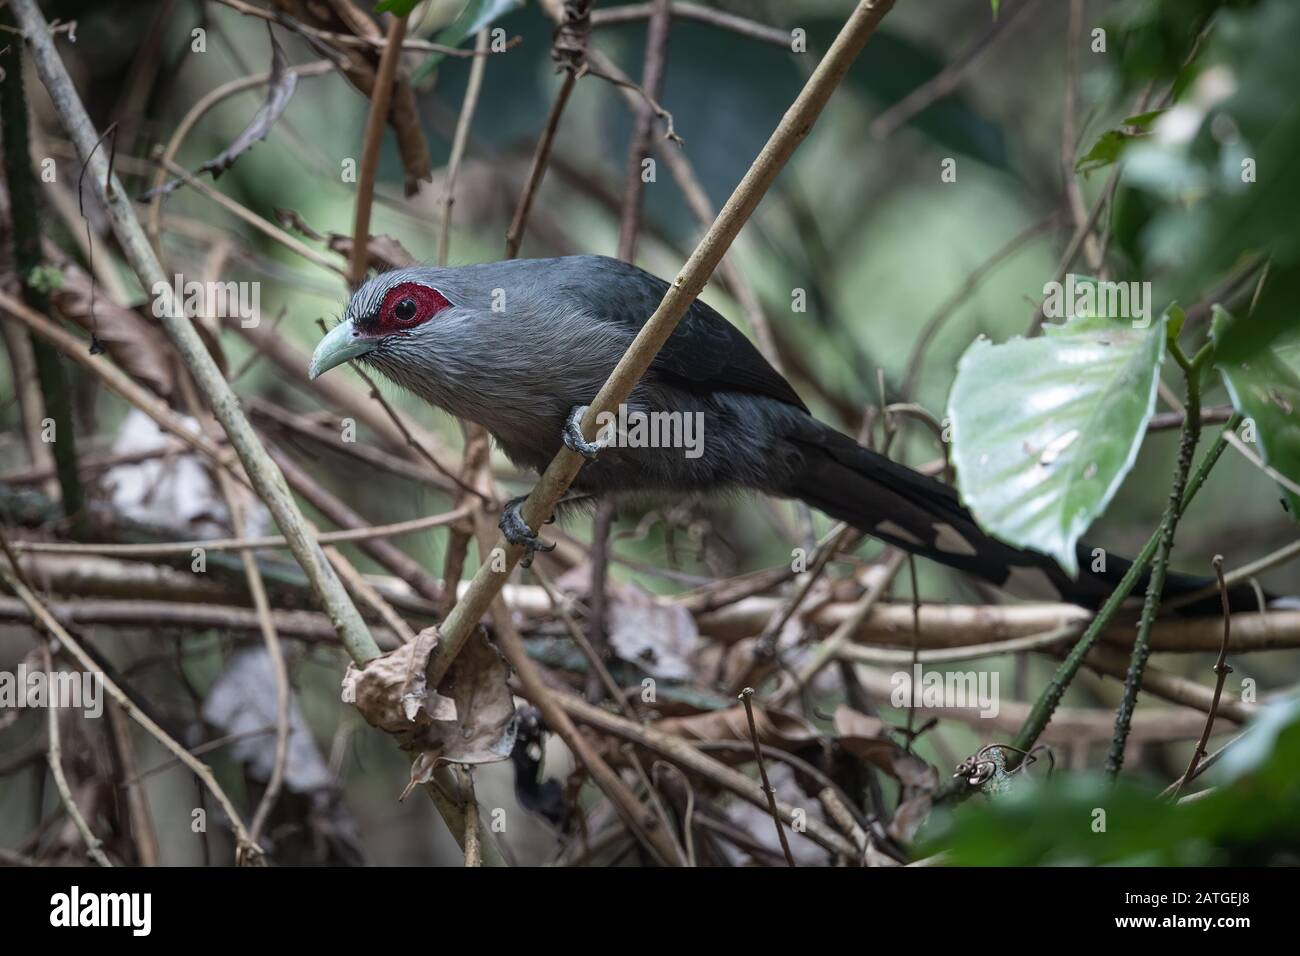 The green-billed malkoha (Phaenicophaeus tristis) is a species of non-parasitic cuckoo found throughout Indian Subcontinent and Southeast Asia. Stock Photo